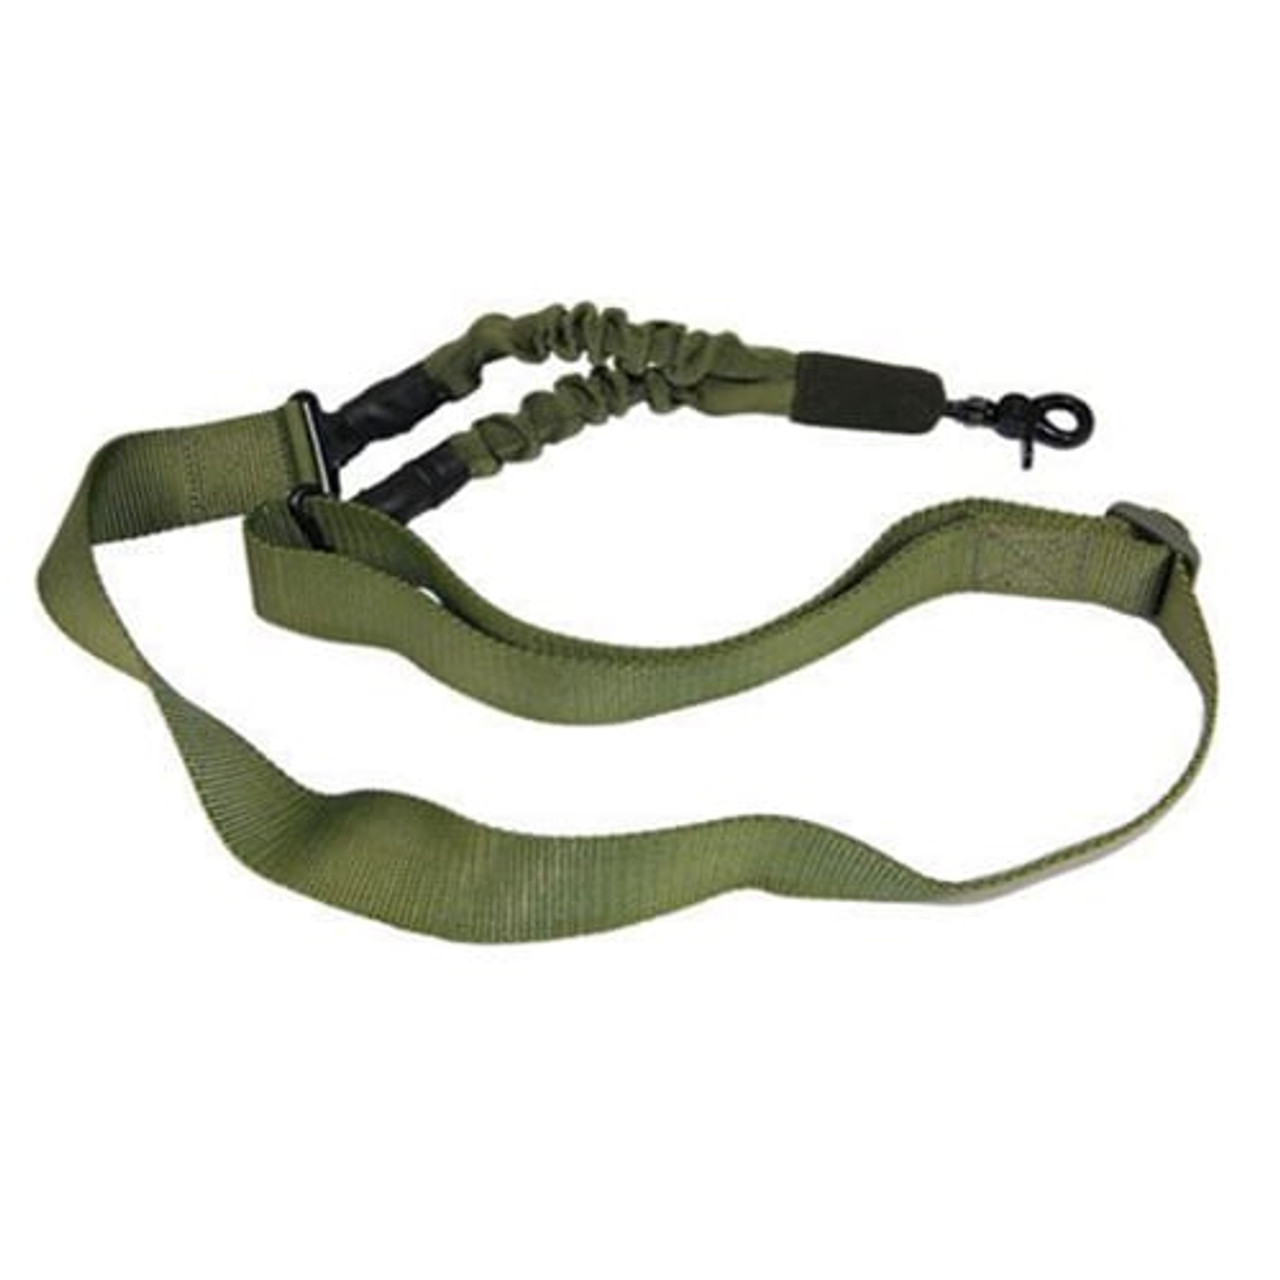 Guntec USA 1POINT-G One Point Bungee Sling With QD Snap Hook (OD Green)